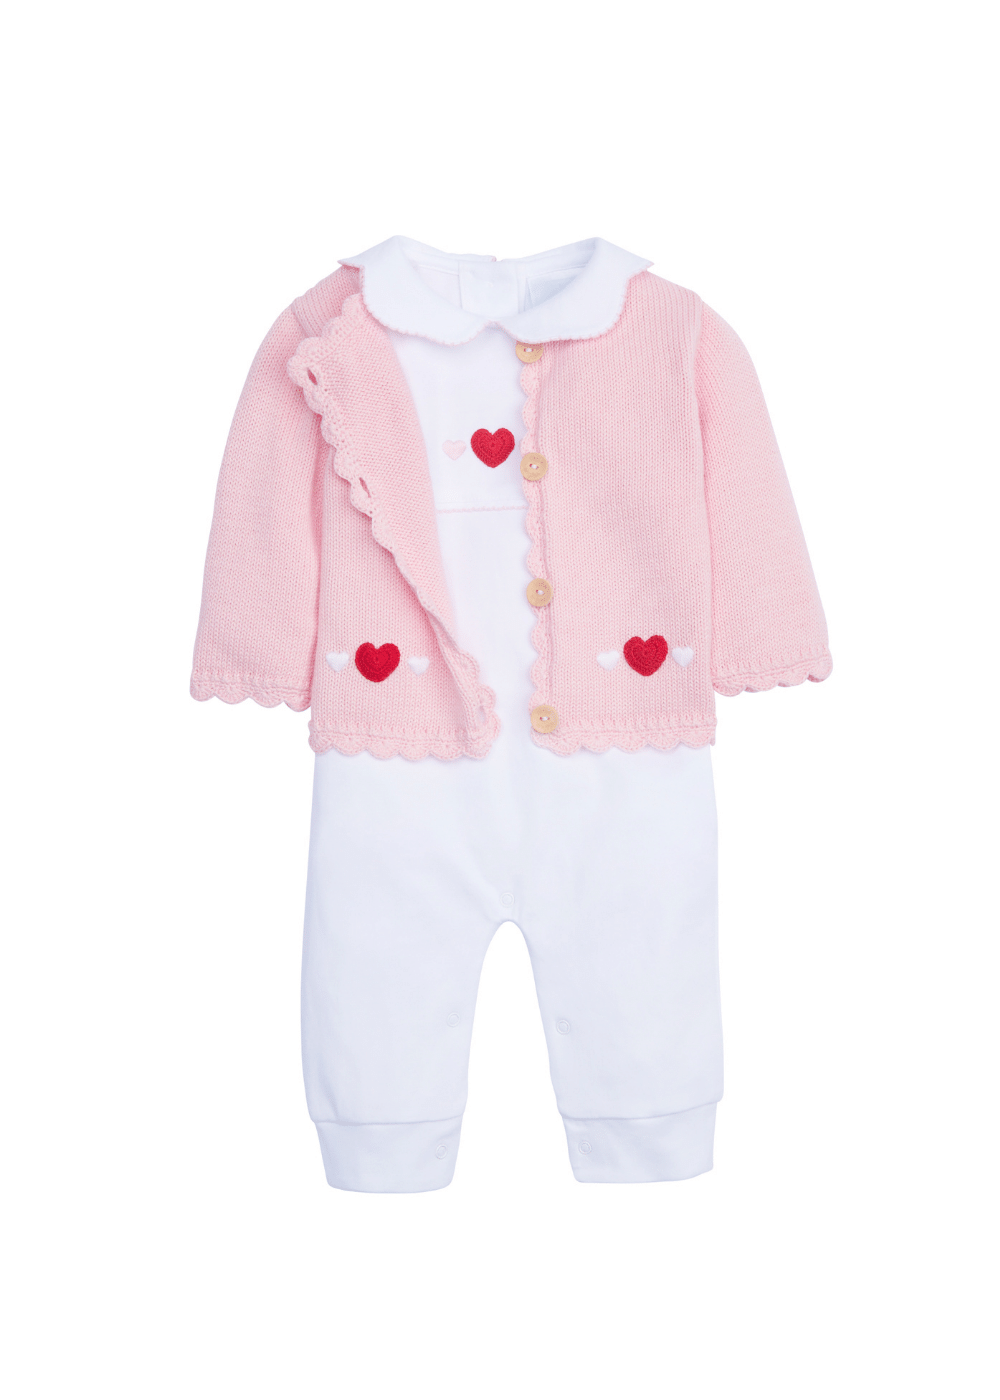 seguridadindustrialcr classic crochet playsuit and sweater with heart details for Valentine's Day